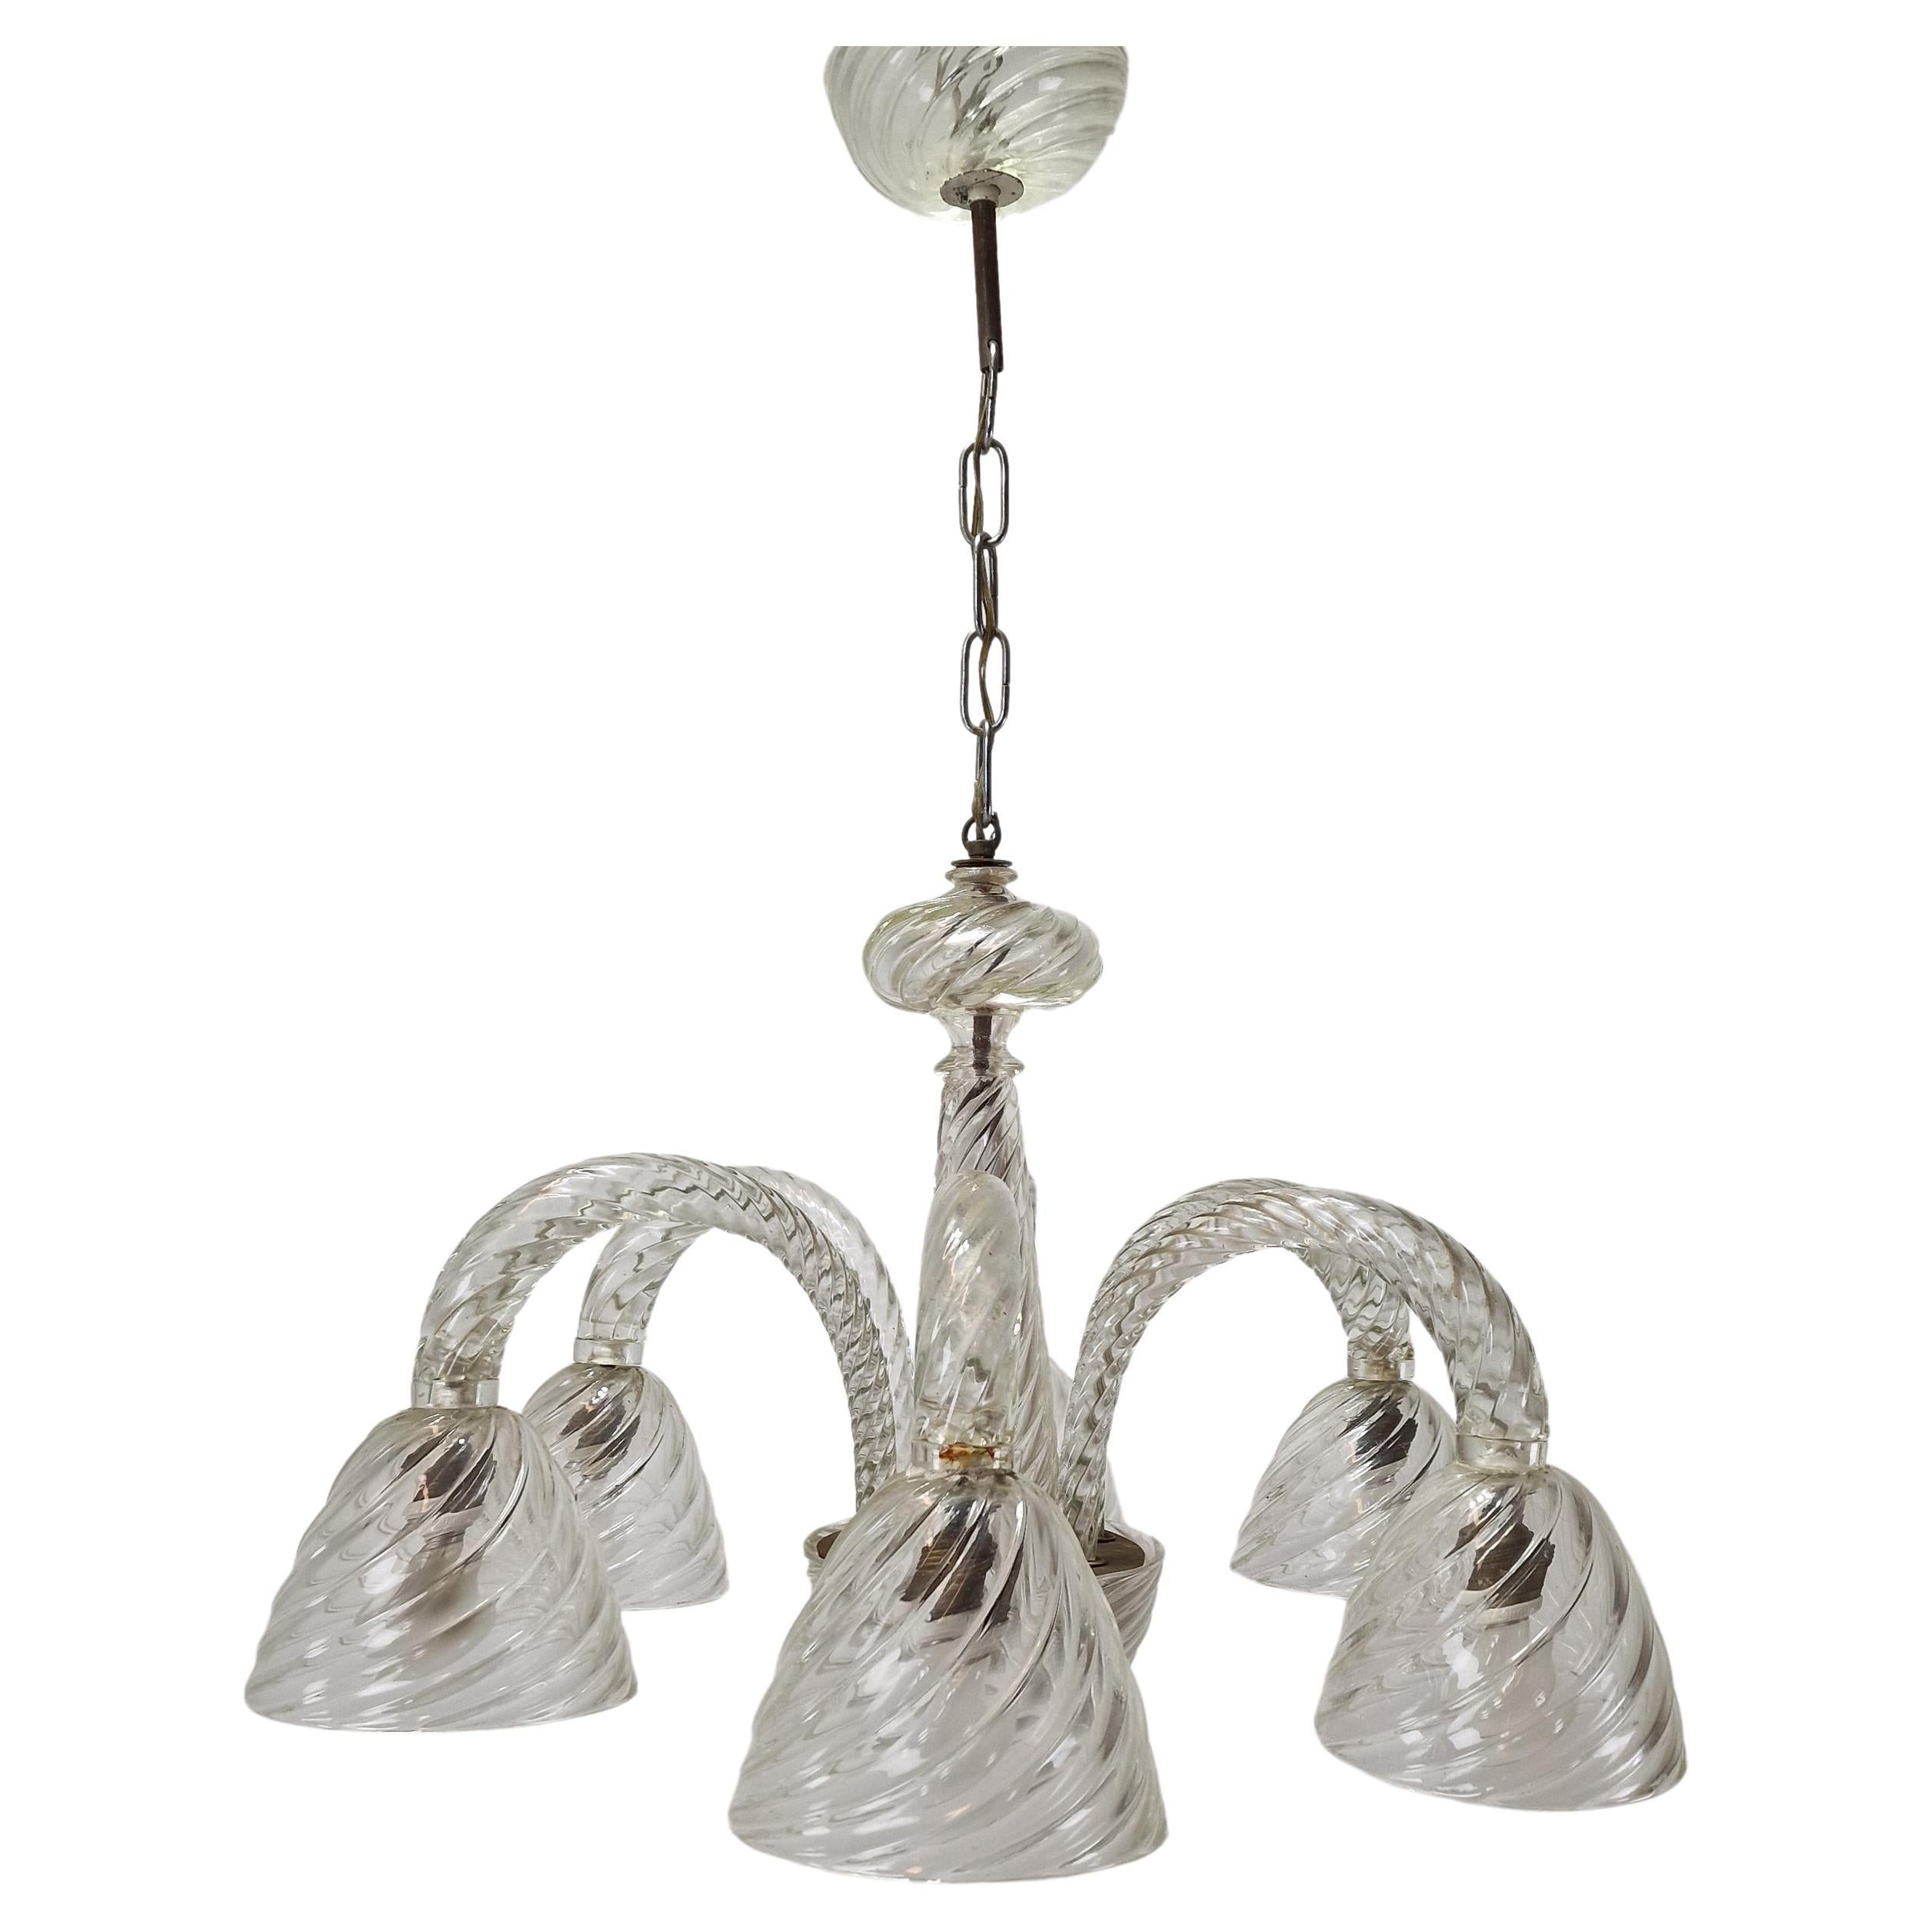 What’s the difference between a pendant and chandelier?